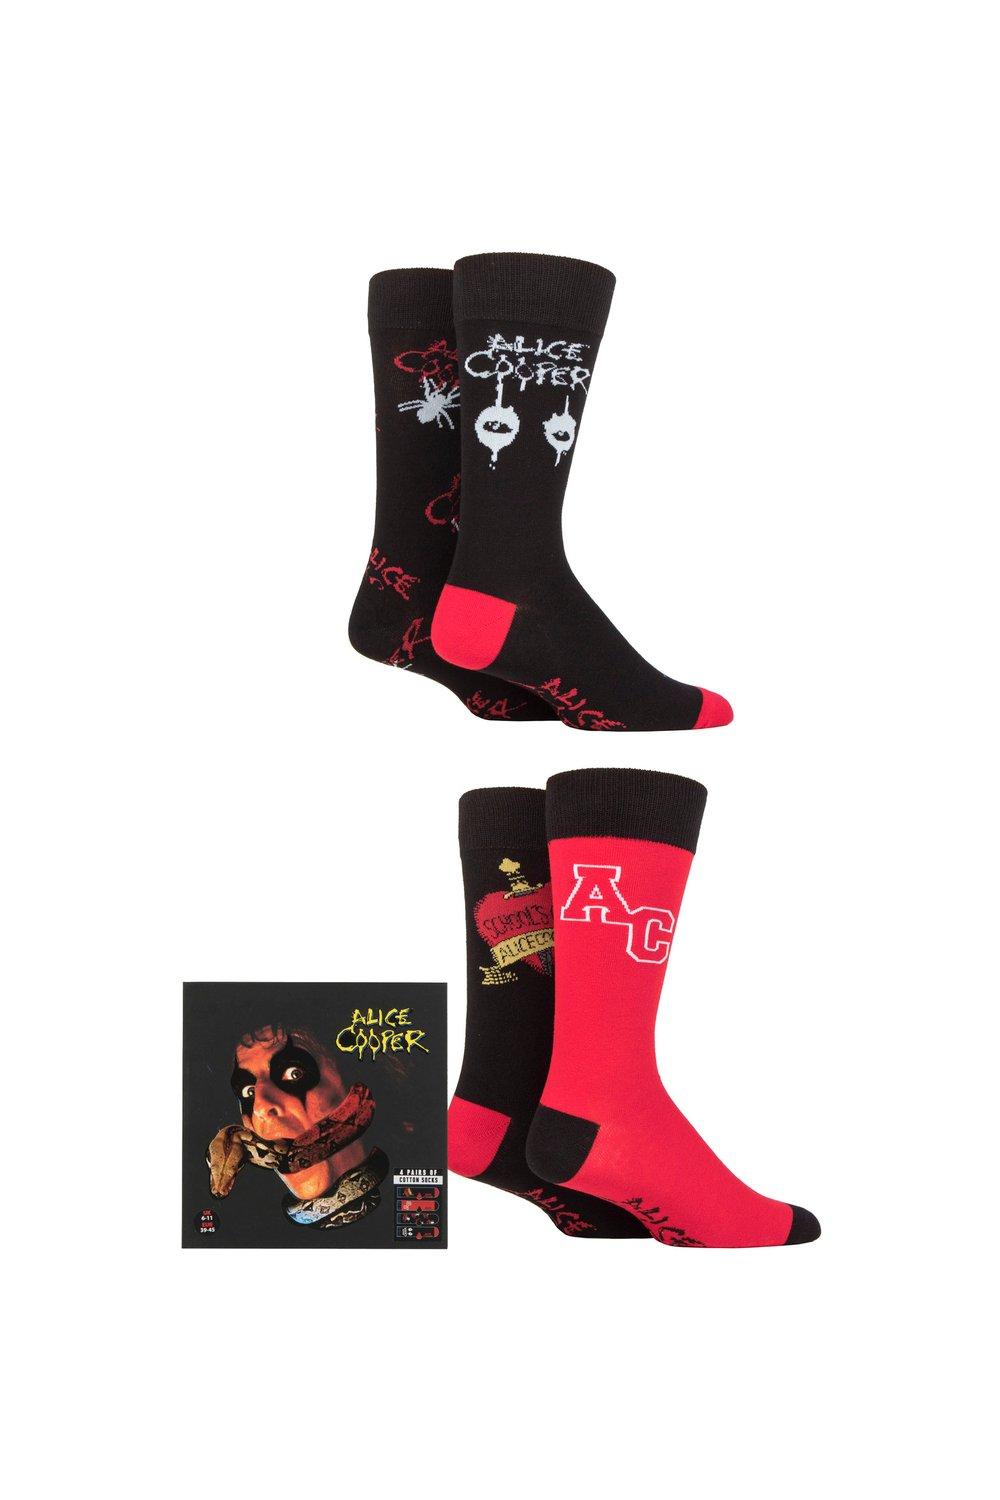 Alice Cooper 4 Pair Exclusive to Gift Boxed Cotton Socks